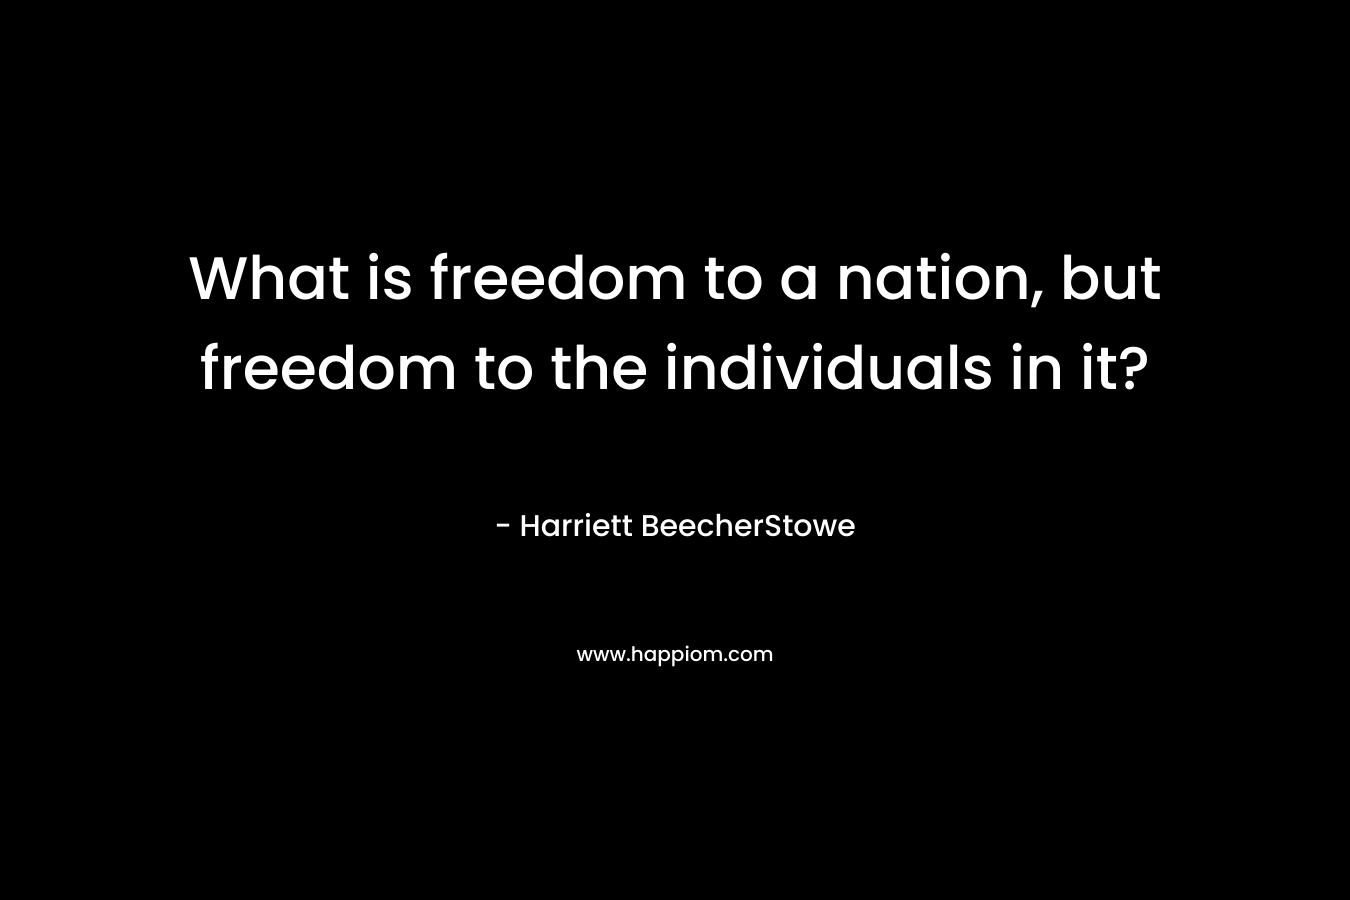 What is freedom to a nation, but freedom to the individuals in it?